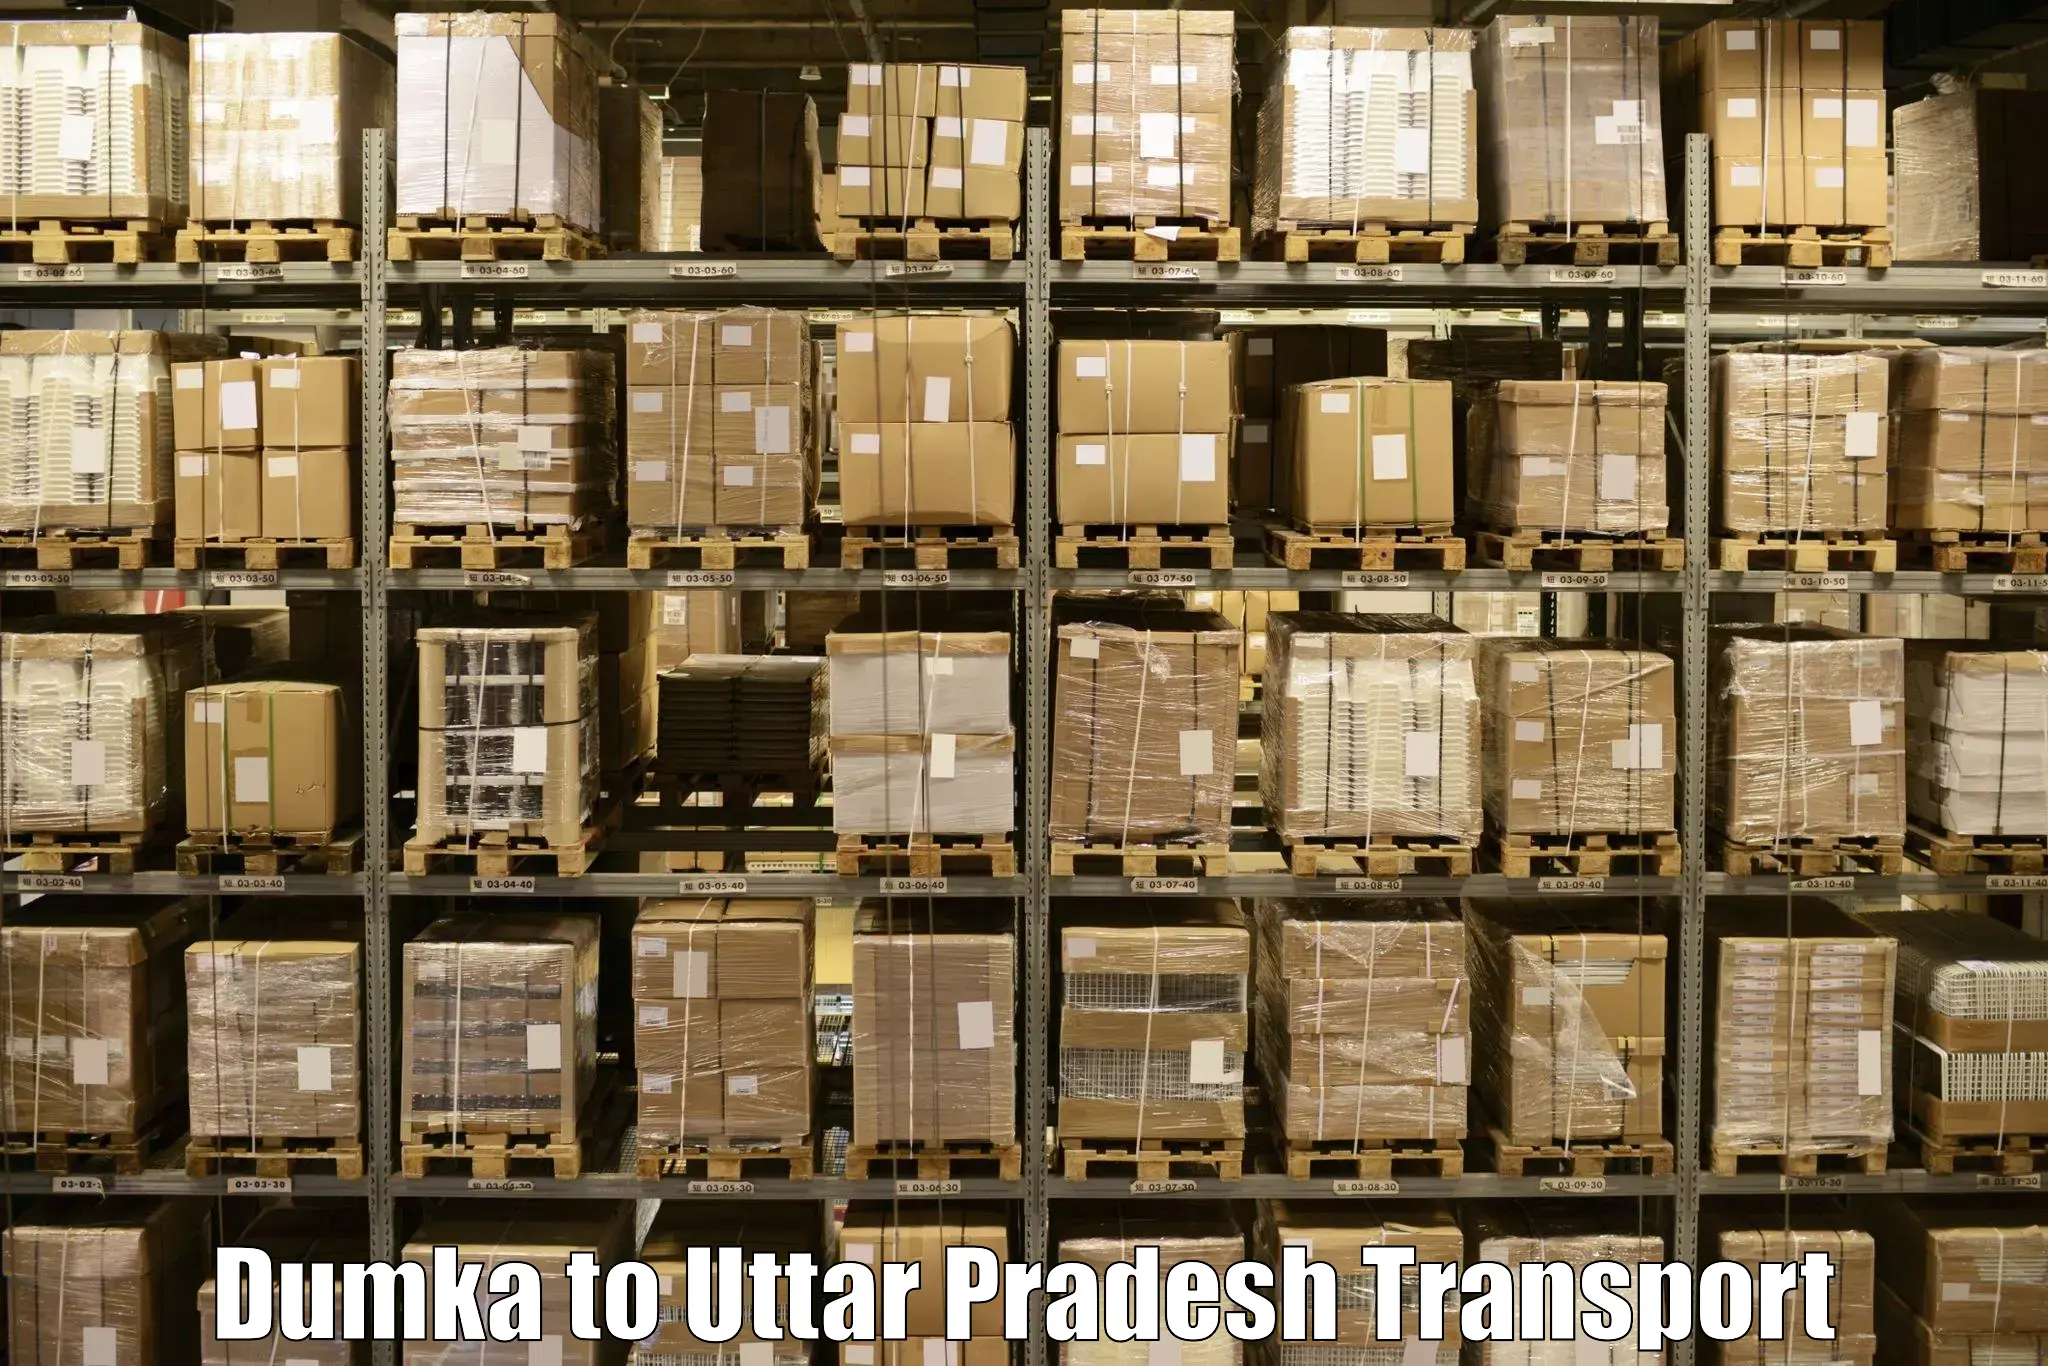 Daily parcel service transport Dumka to Ghazipur